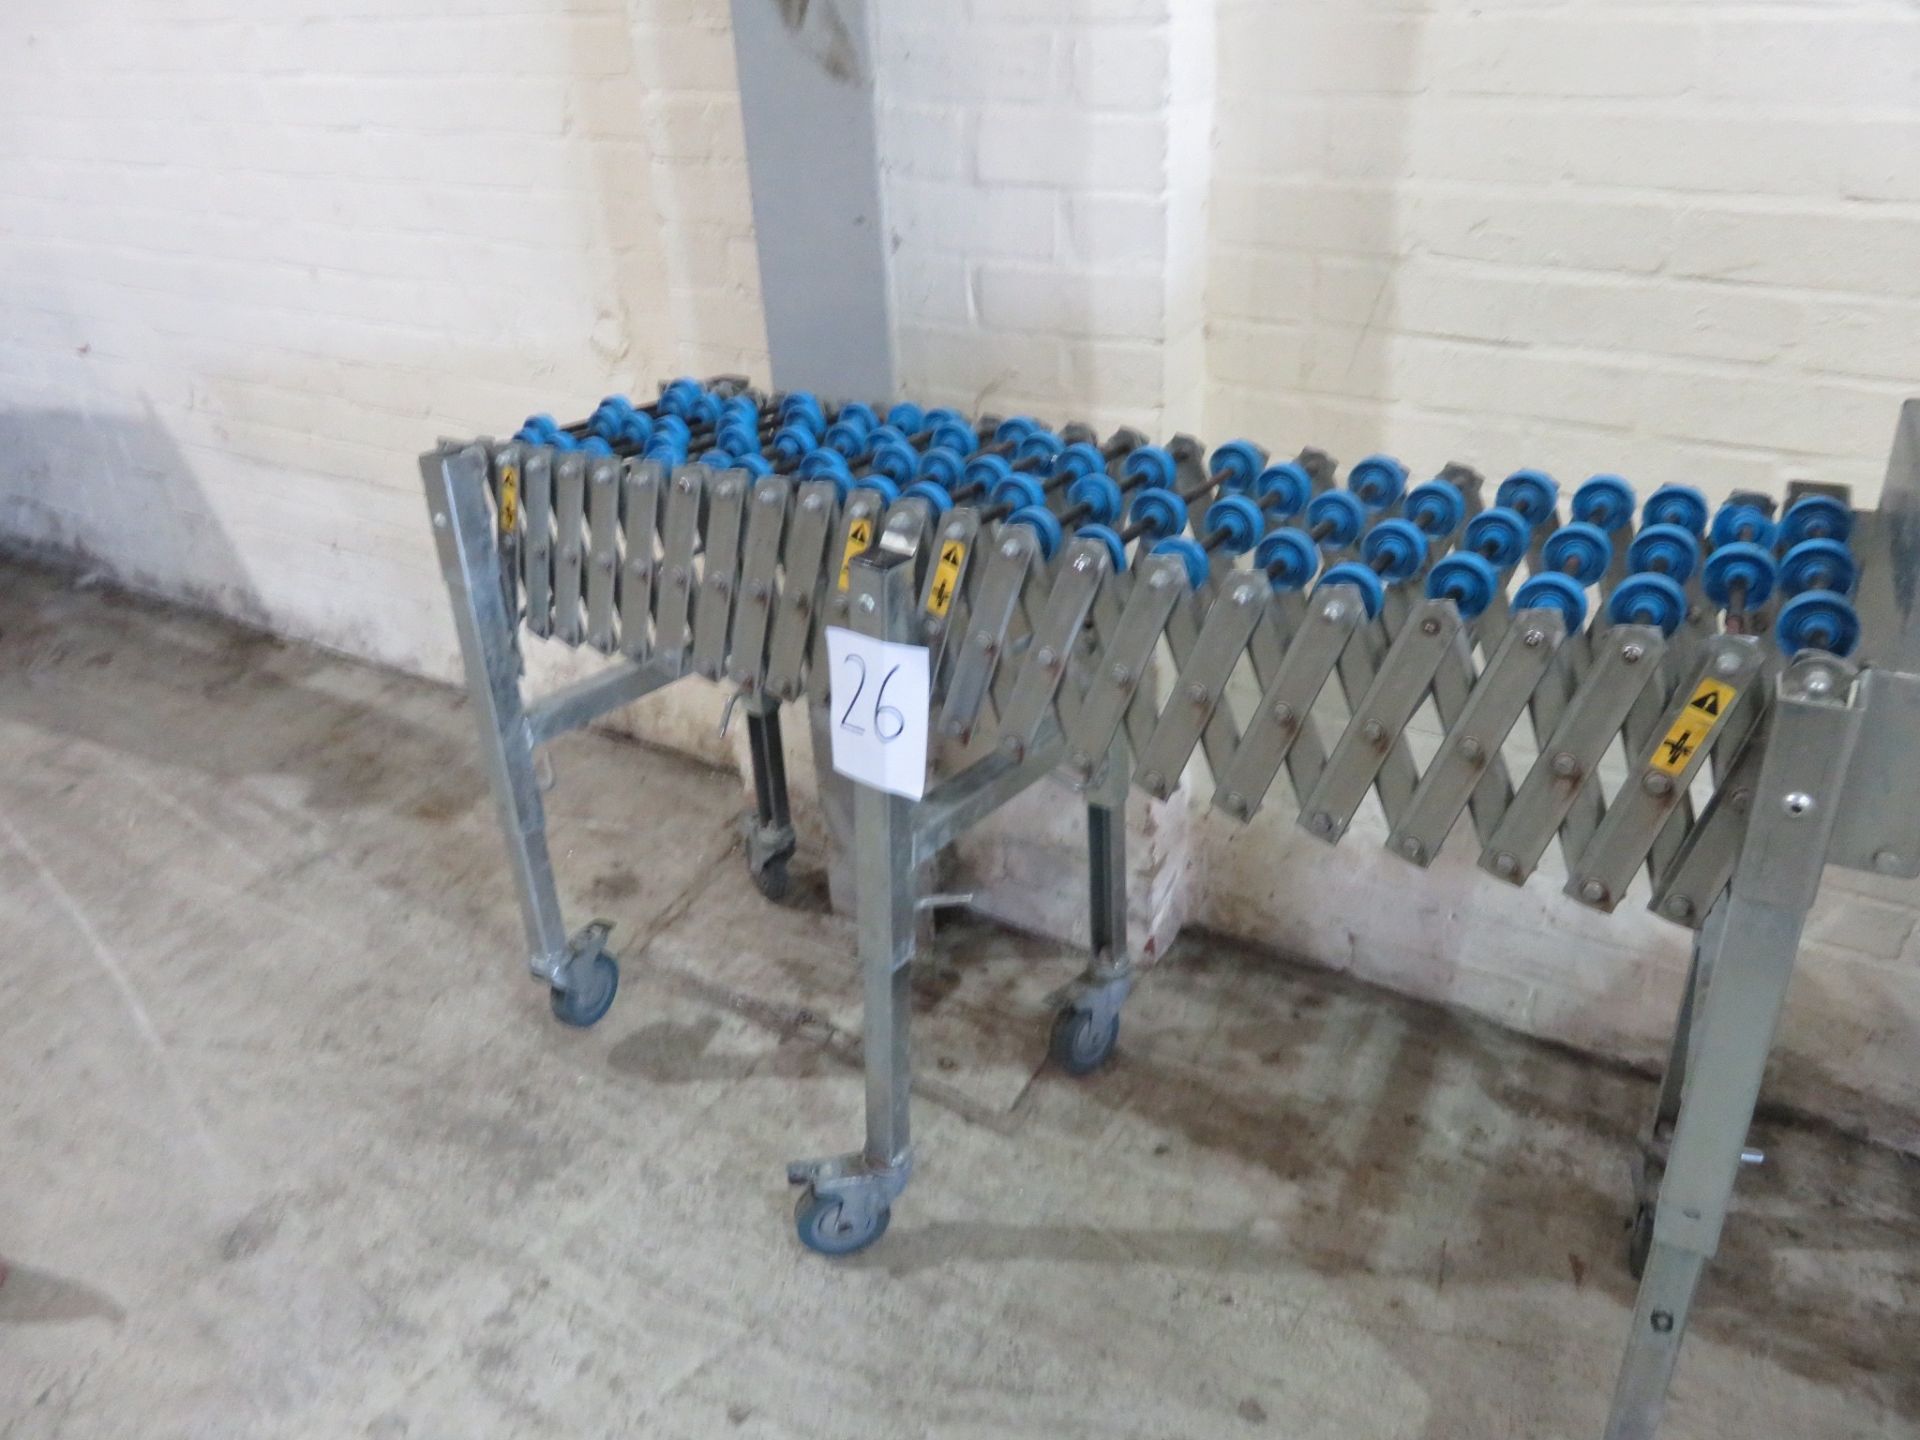 Expandable roller Conveyor 1300mm - 3400mm long x 300mm wide LIFT OUT £5 - Image 2 of 2